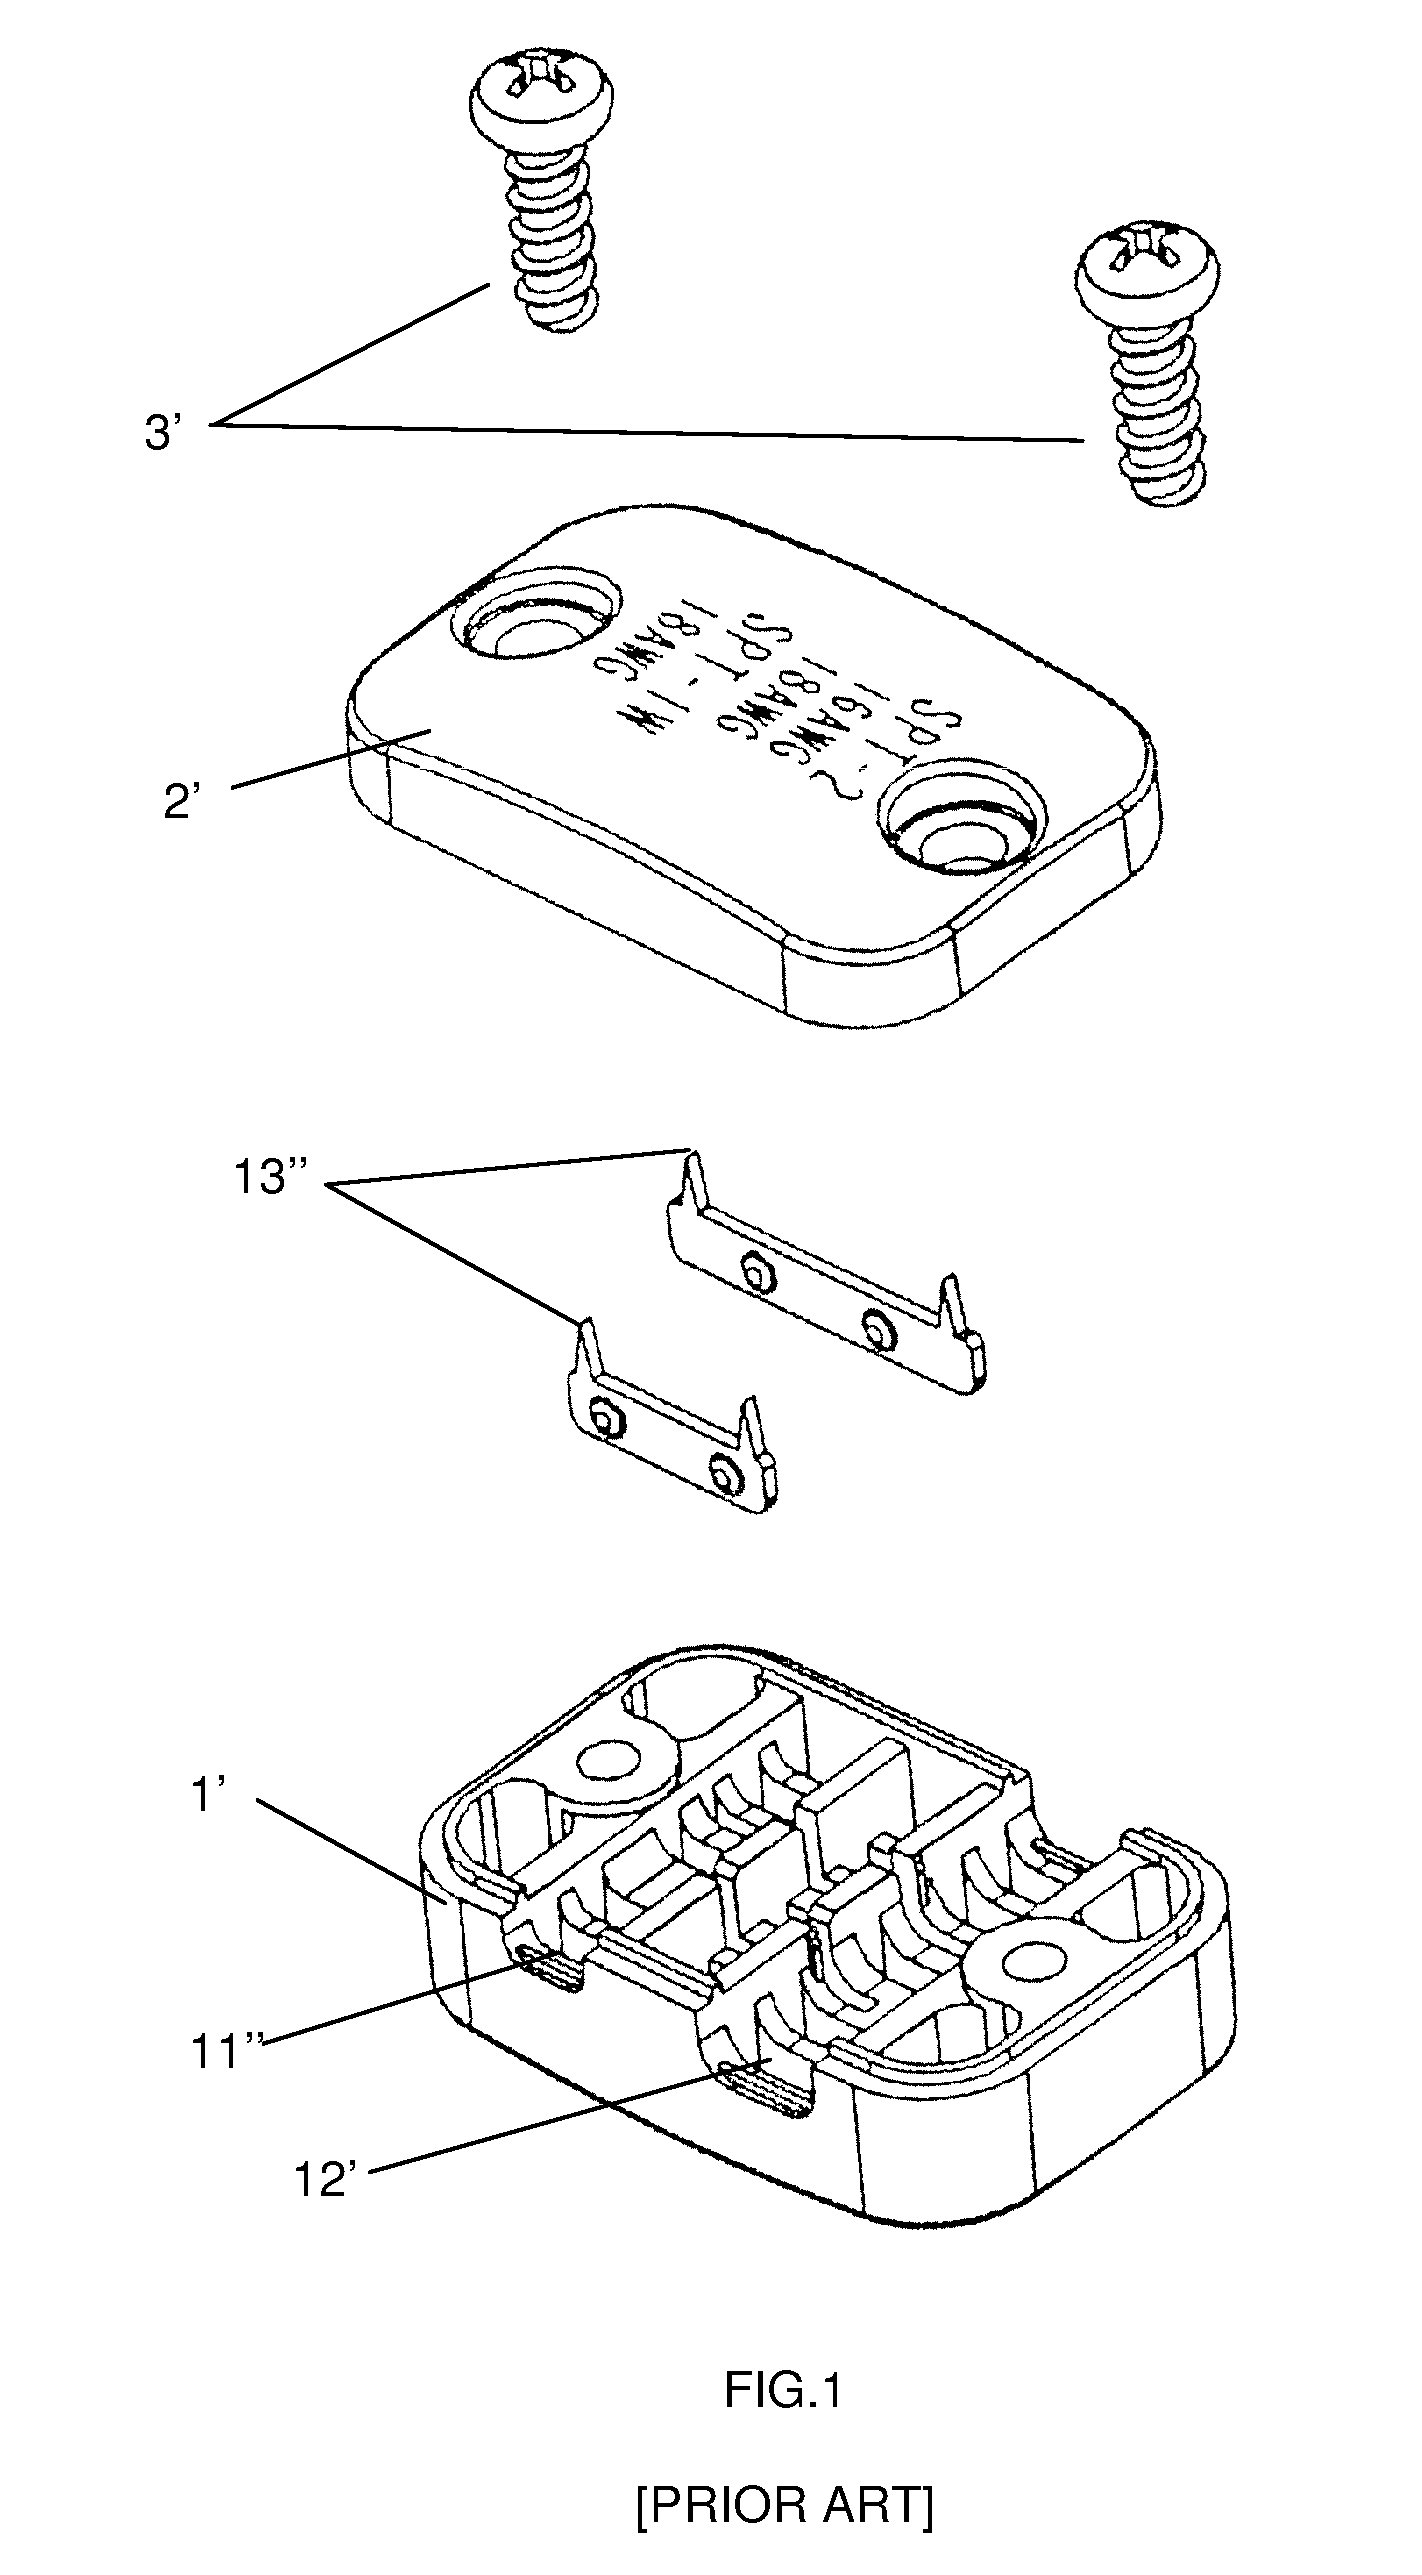 Electrical connector for electrical communication between a power cable and an electrical device